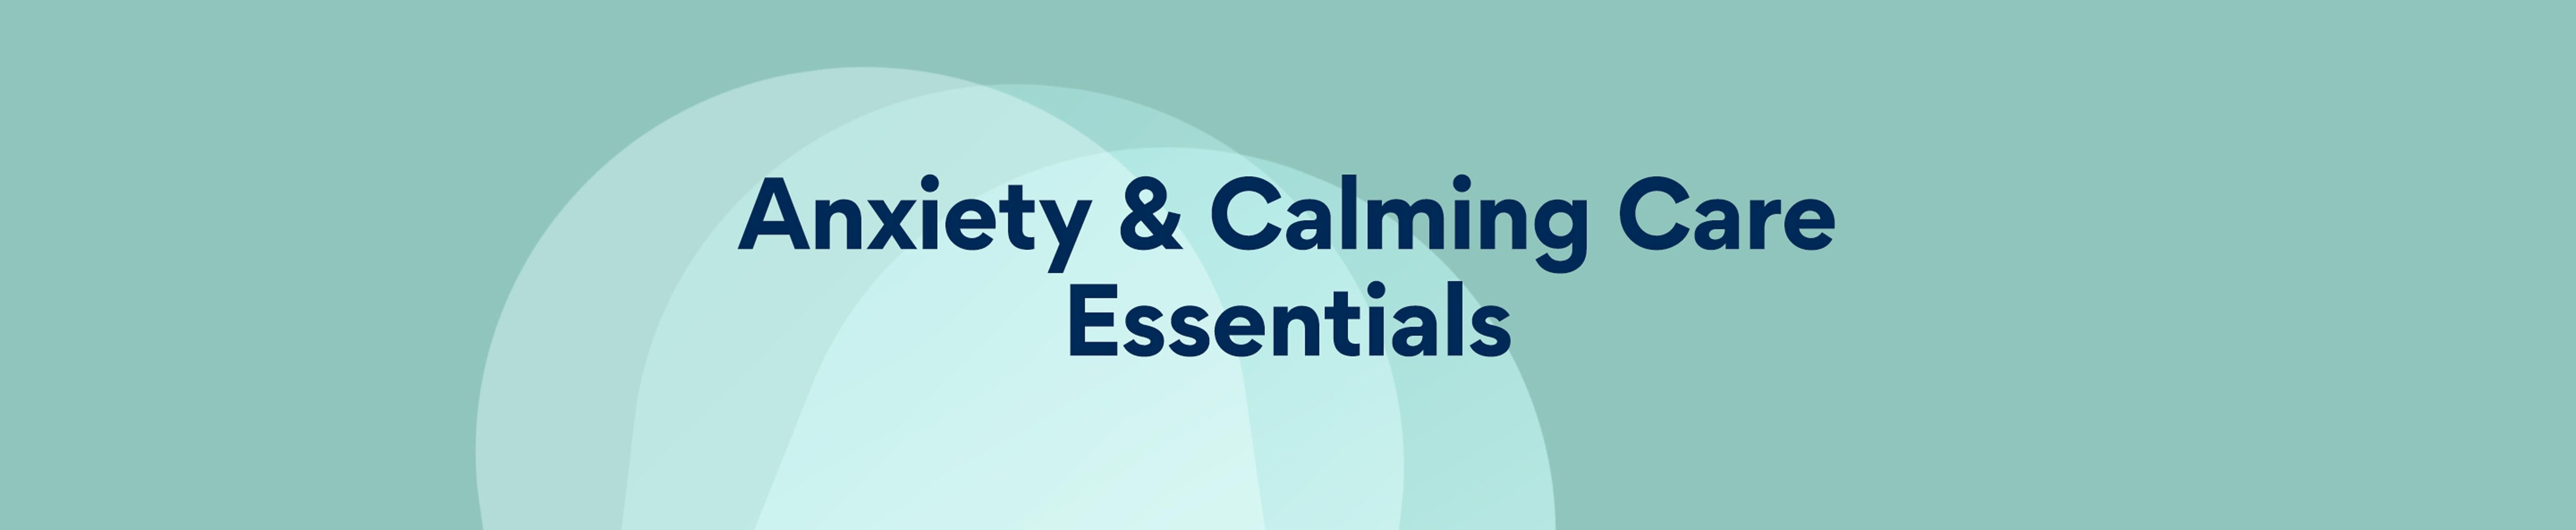 Anxiety & Calming Care Essentials